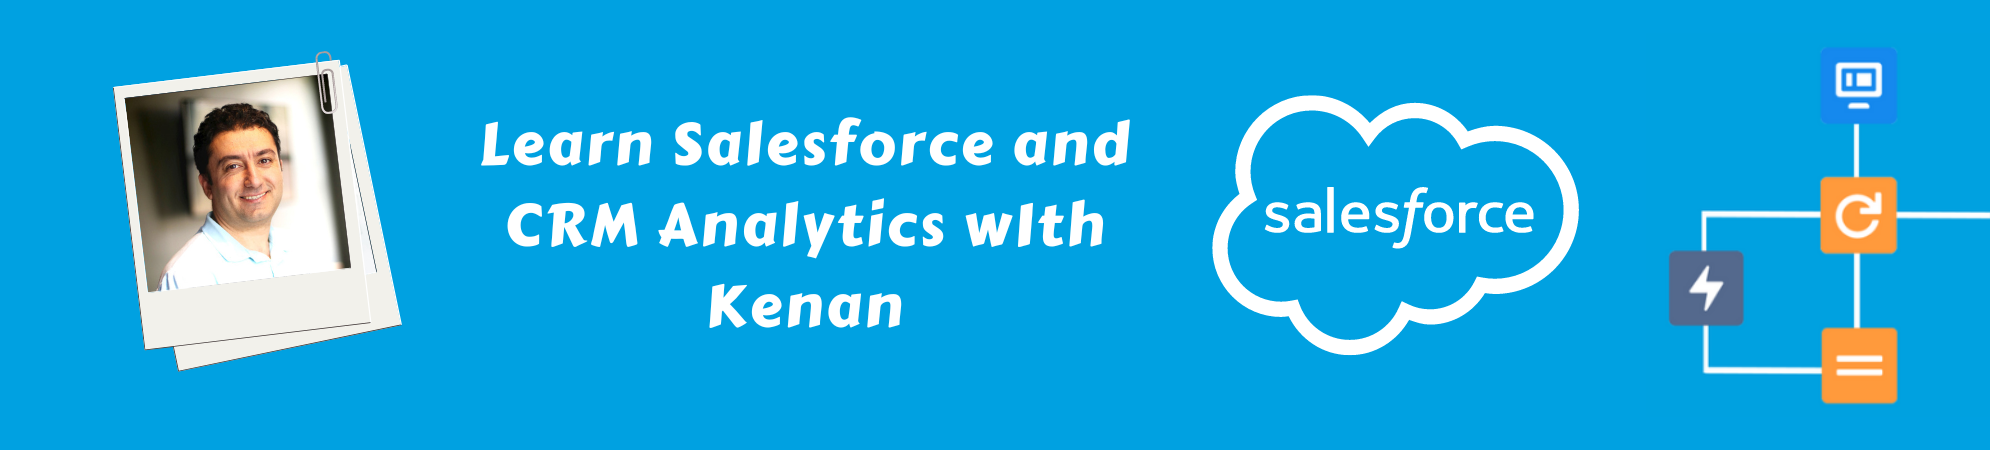 Learn Salesforce and CRM Analytics with Kenan